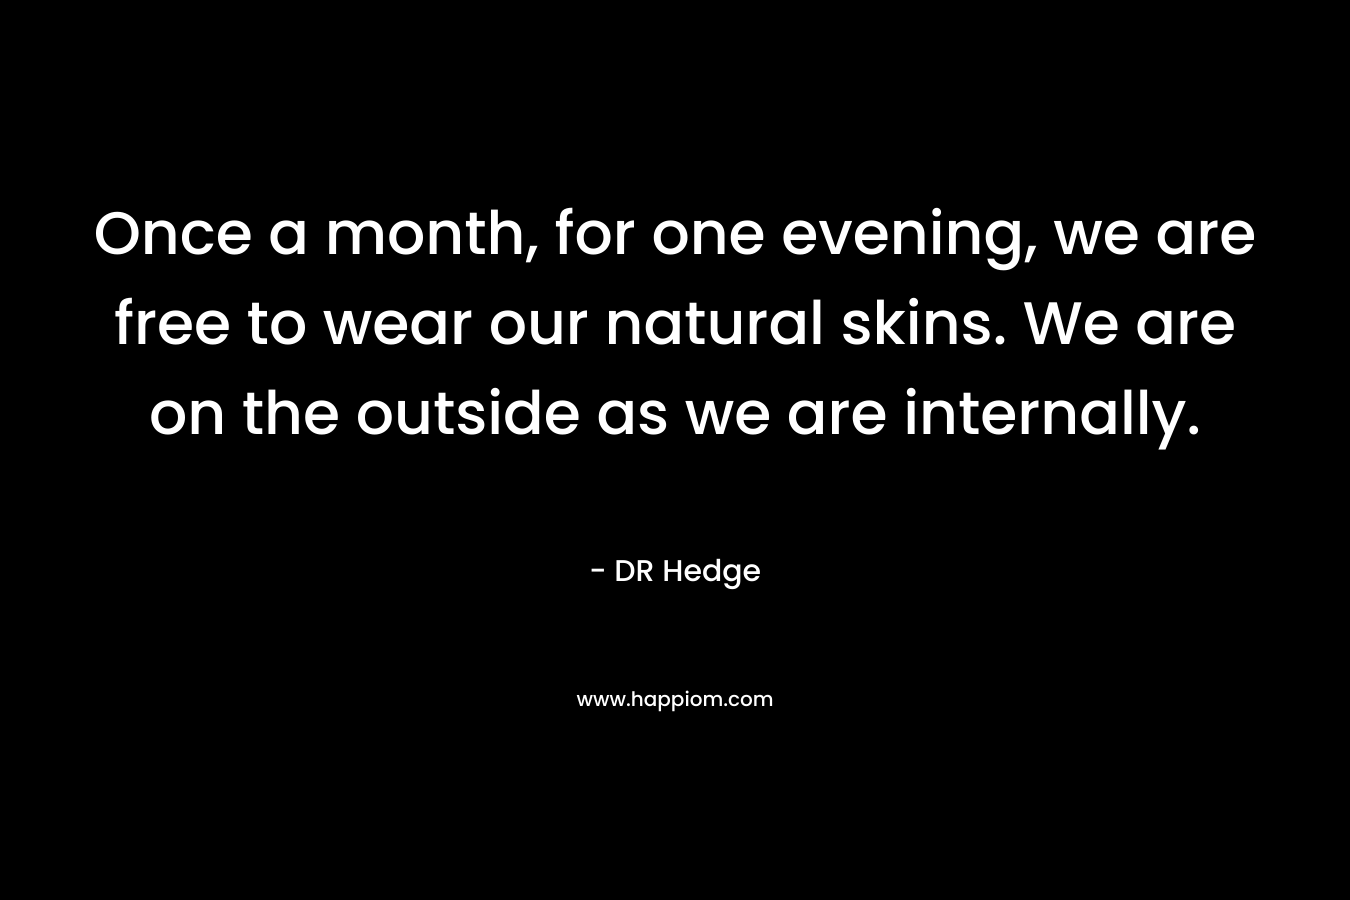 Once a month, for one evening, we are free to wear our natural skins. We are on the outside as we are internally.